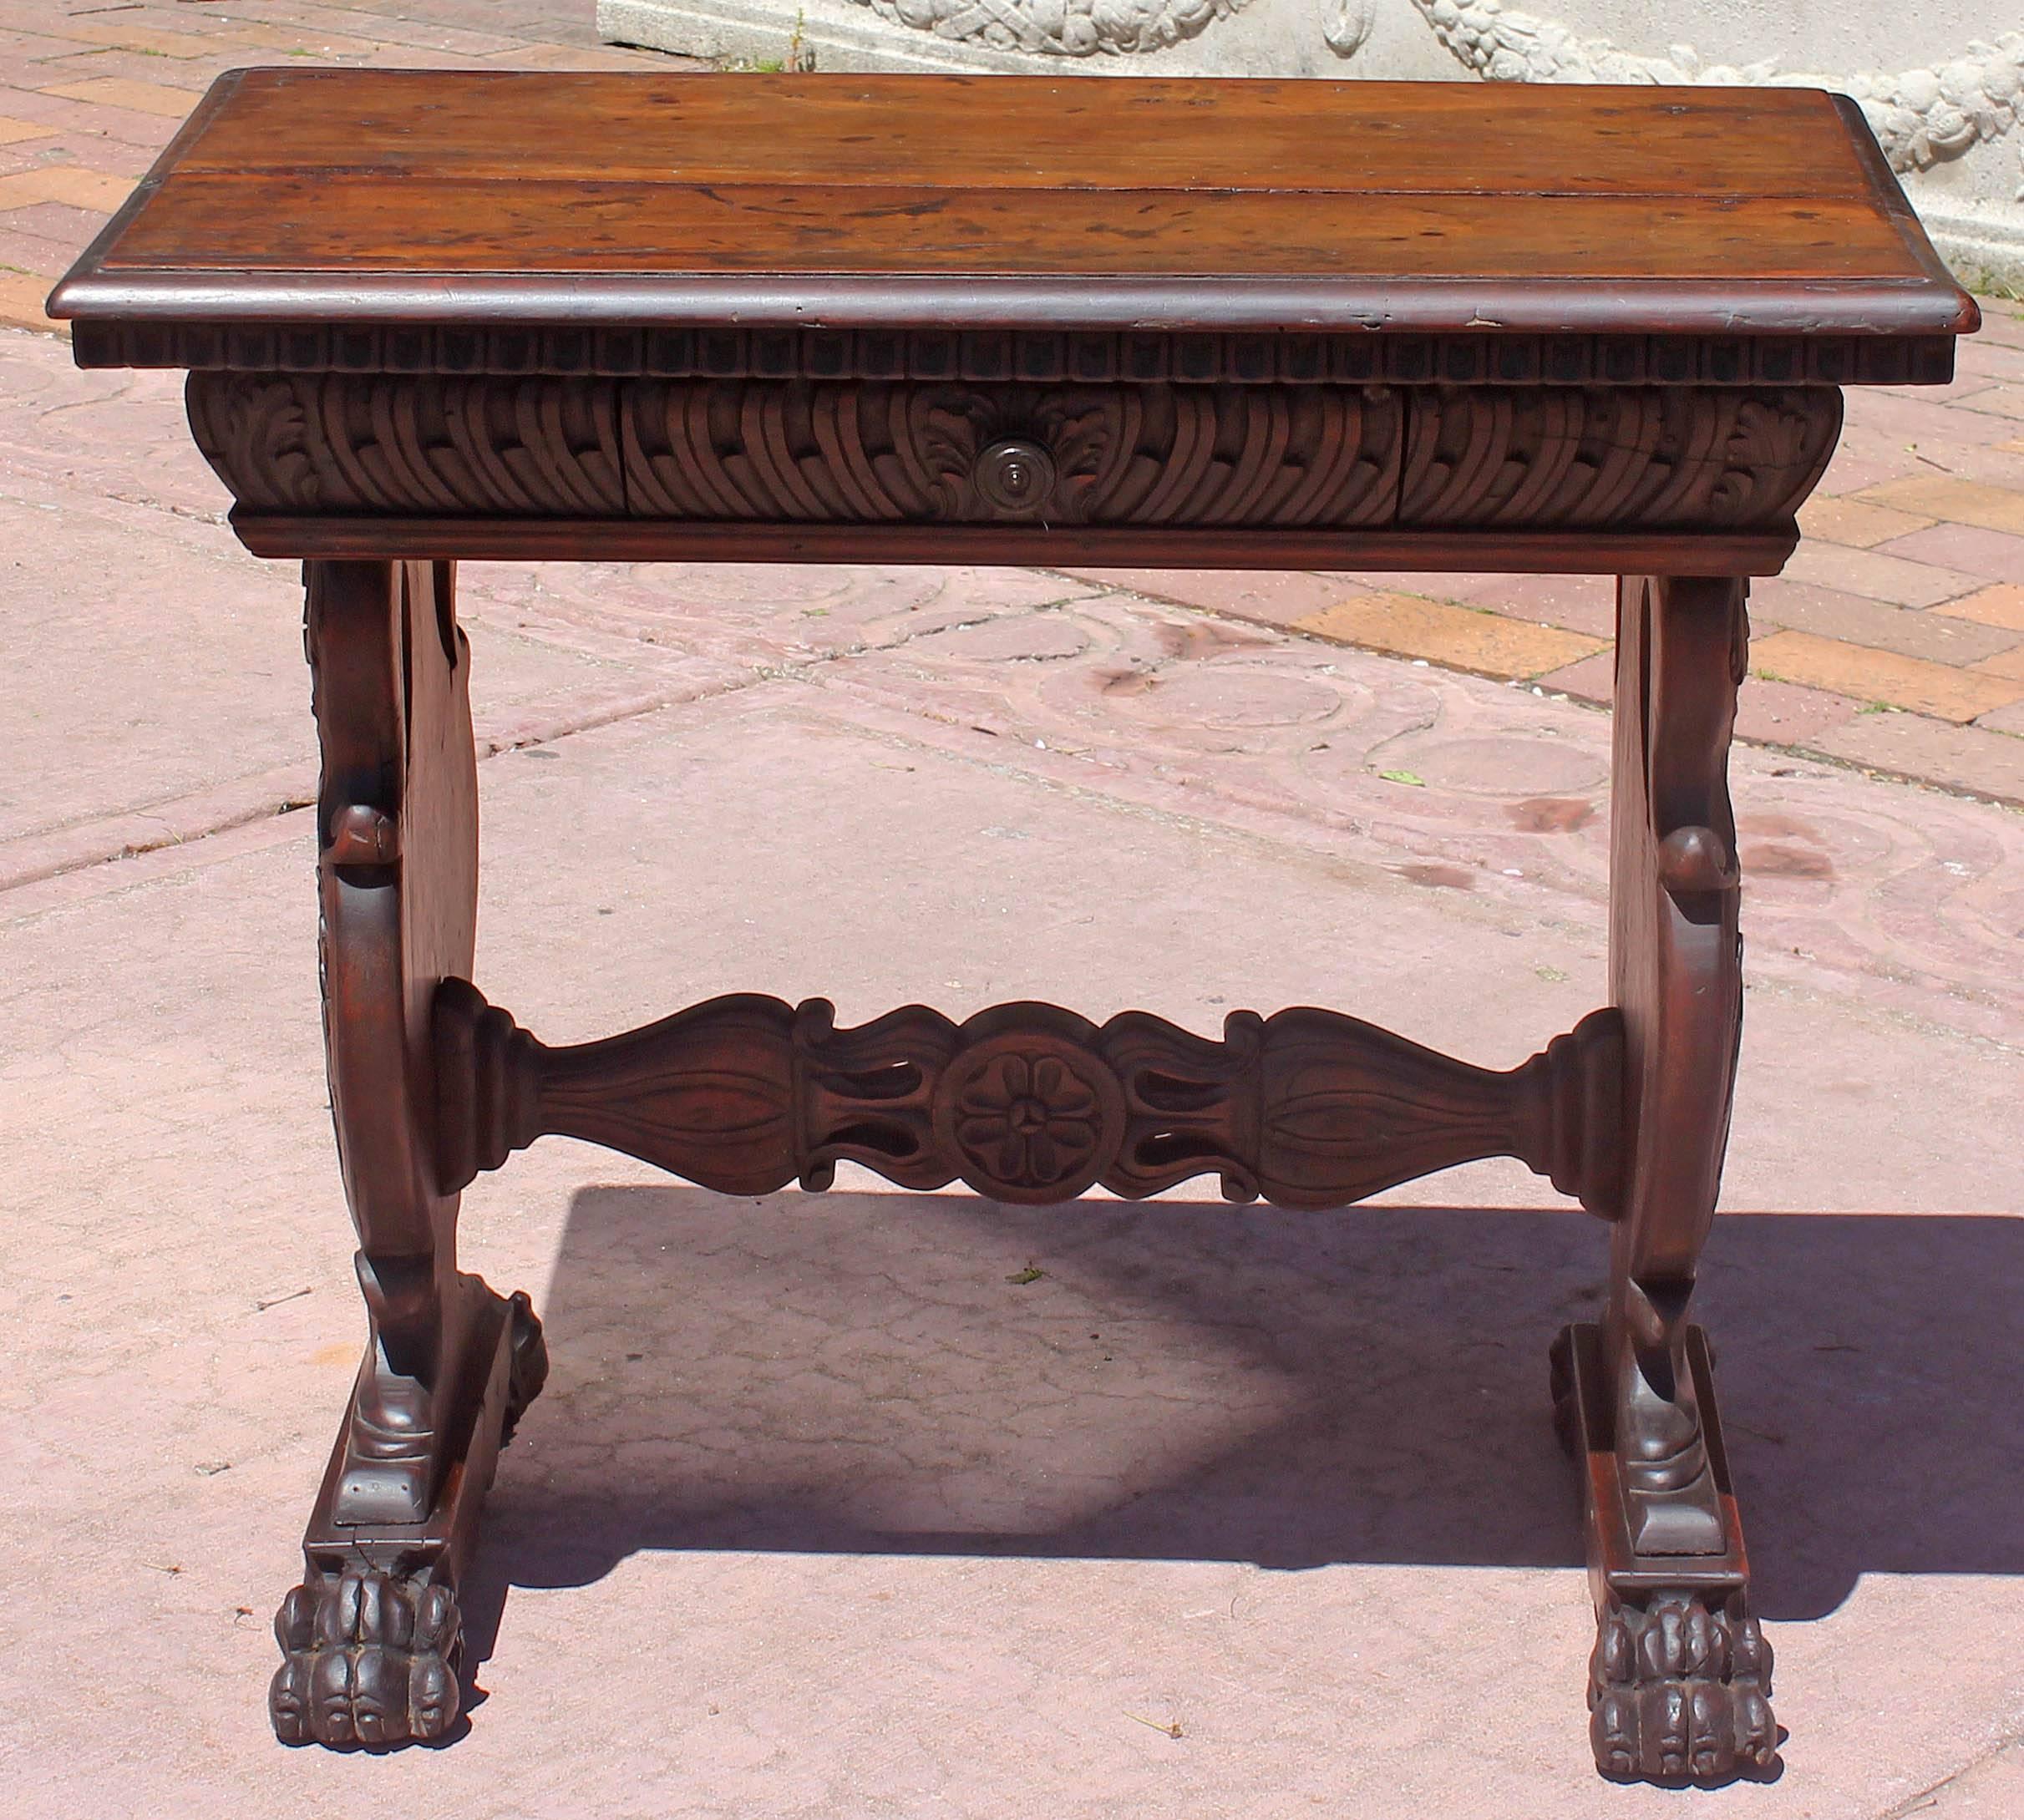 Antique Baroque walnut side table. Well carved with rich patina. Made of 18th and 19th century elements. Single drawer.